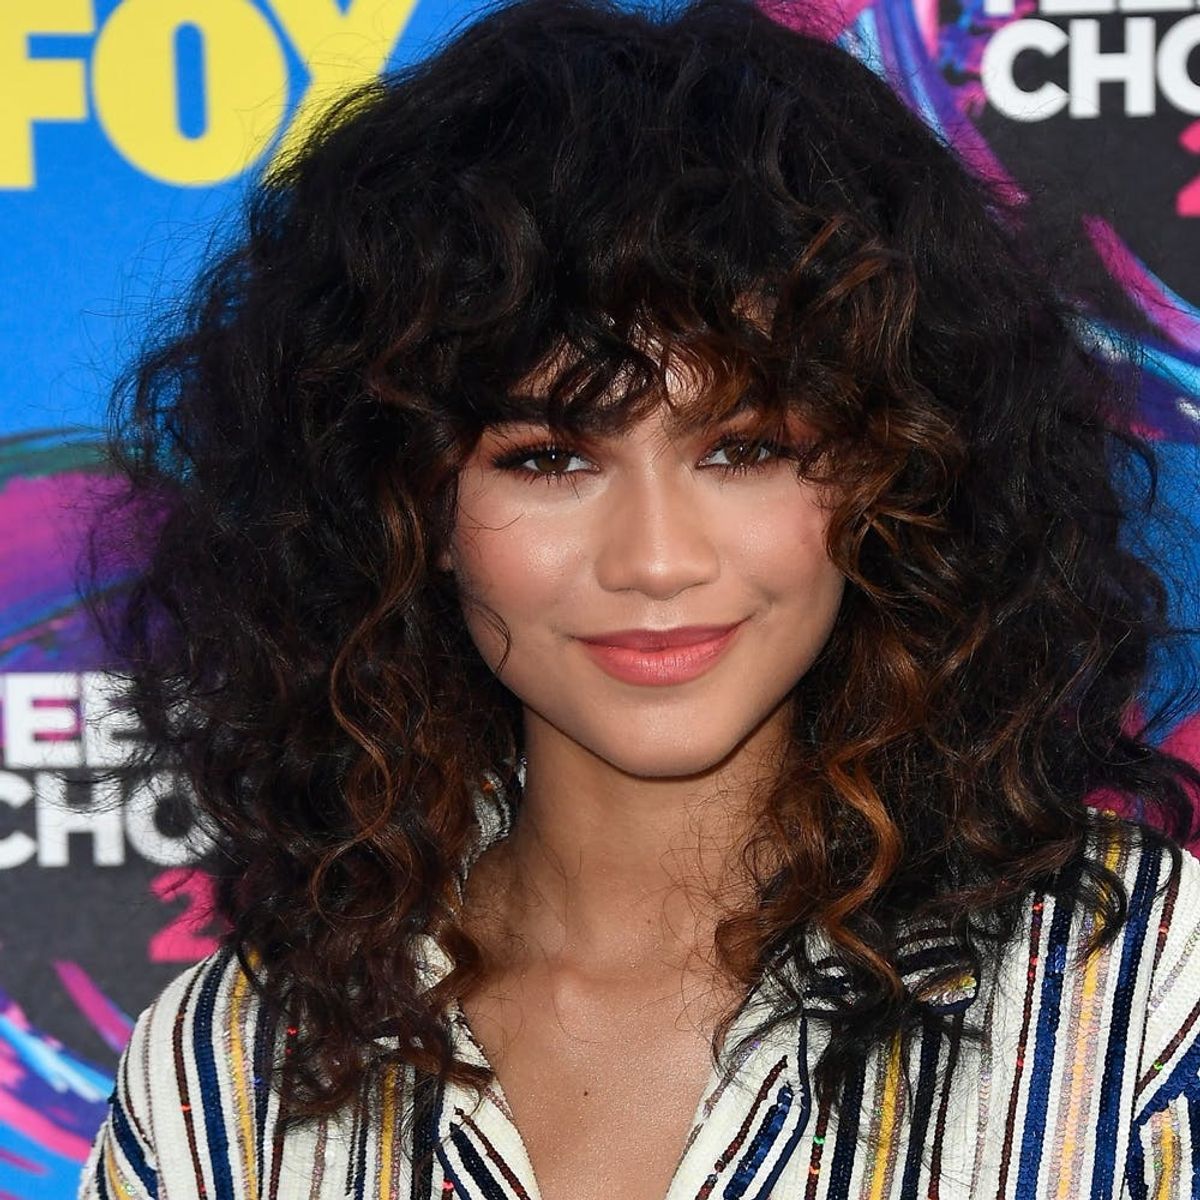 Zendaya Has a Really Unexpected Hairstyle, and It’s Fantastic